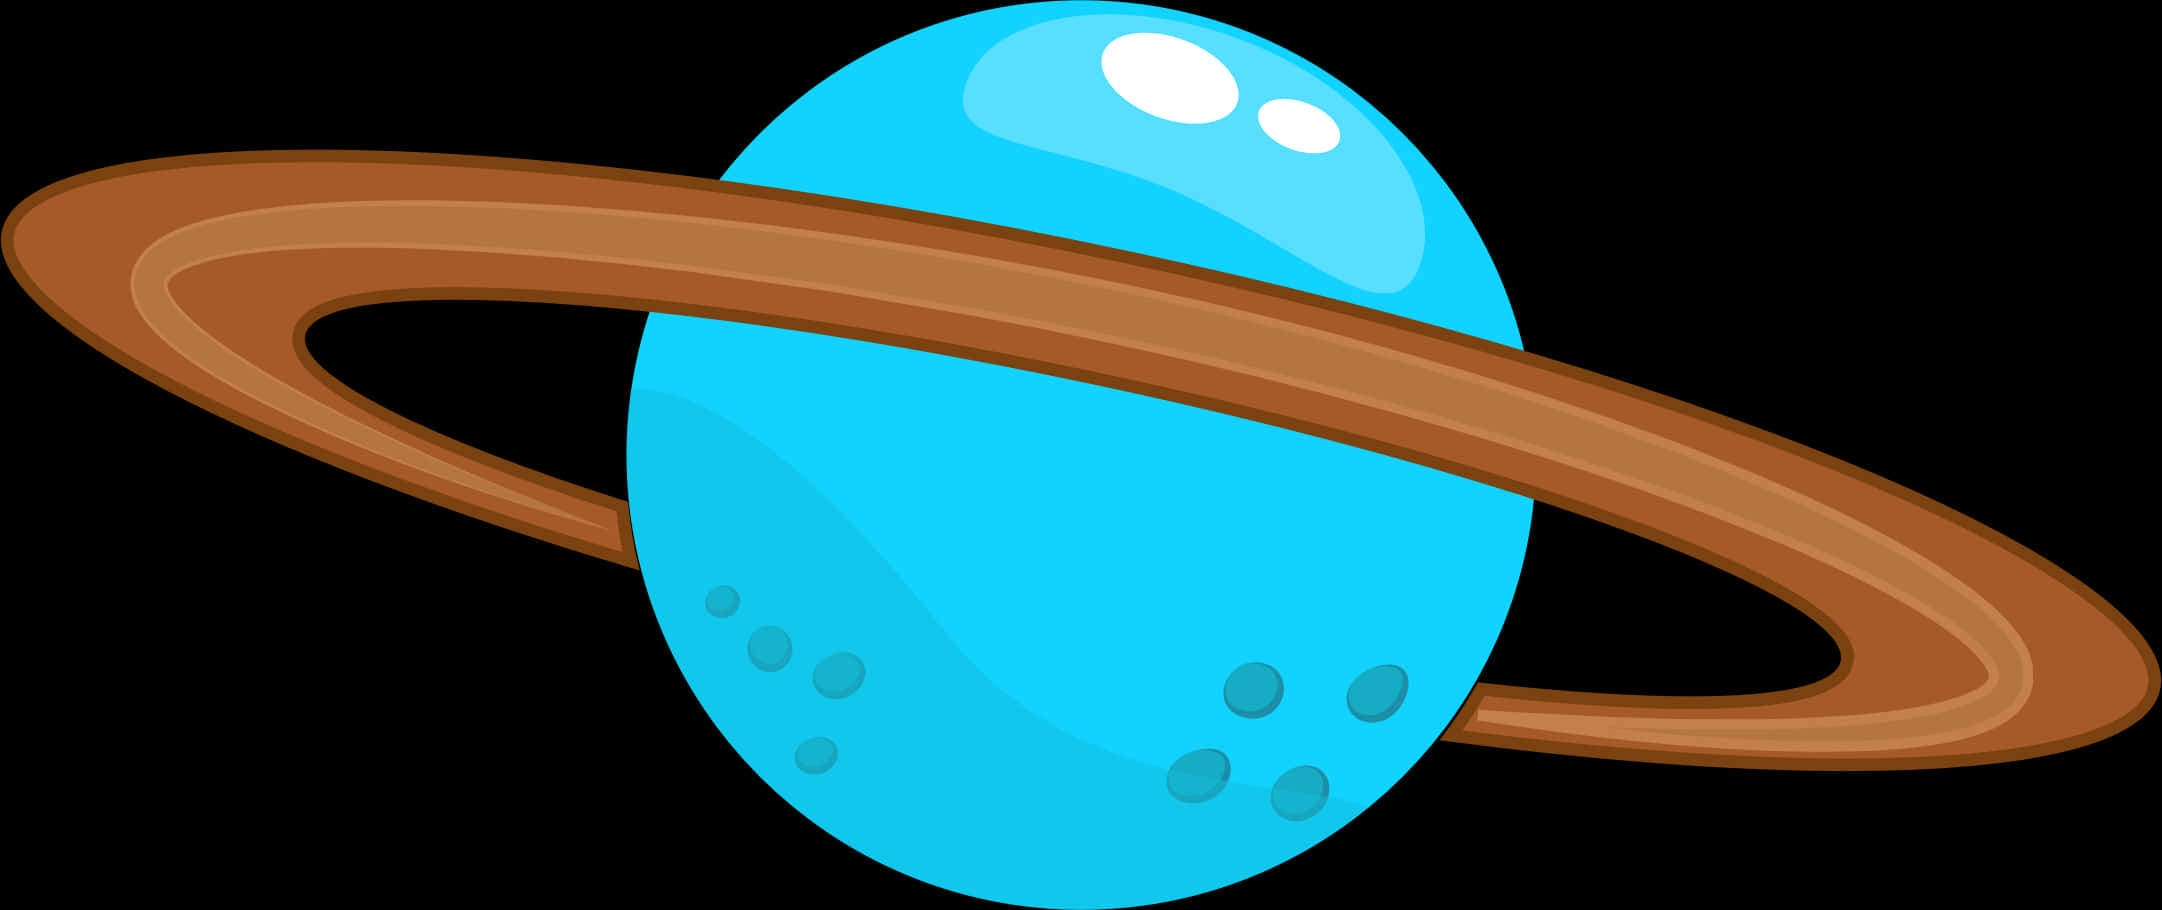 Blue Ringed Planet Graphic